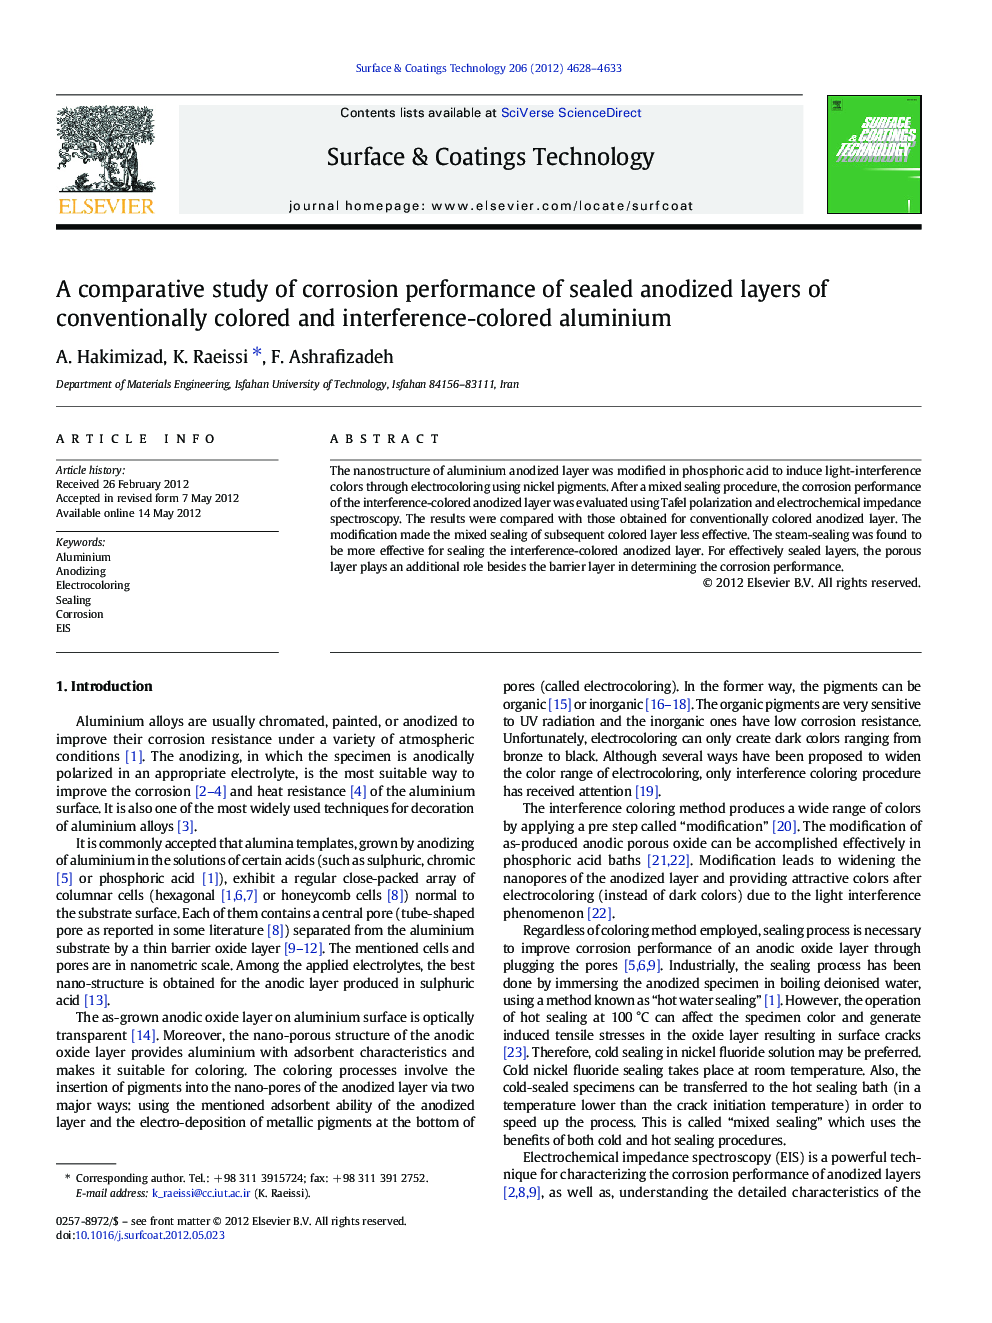 A comparative study of corrosion performance of sealed anodized layers of conventionally colored and interference-colored aluminium